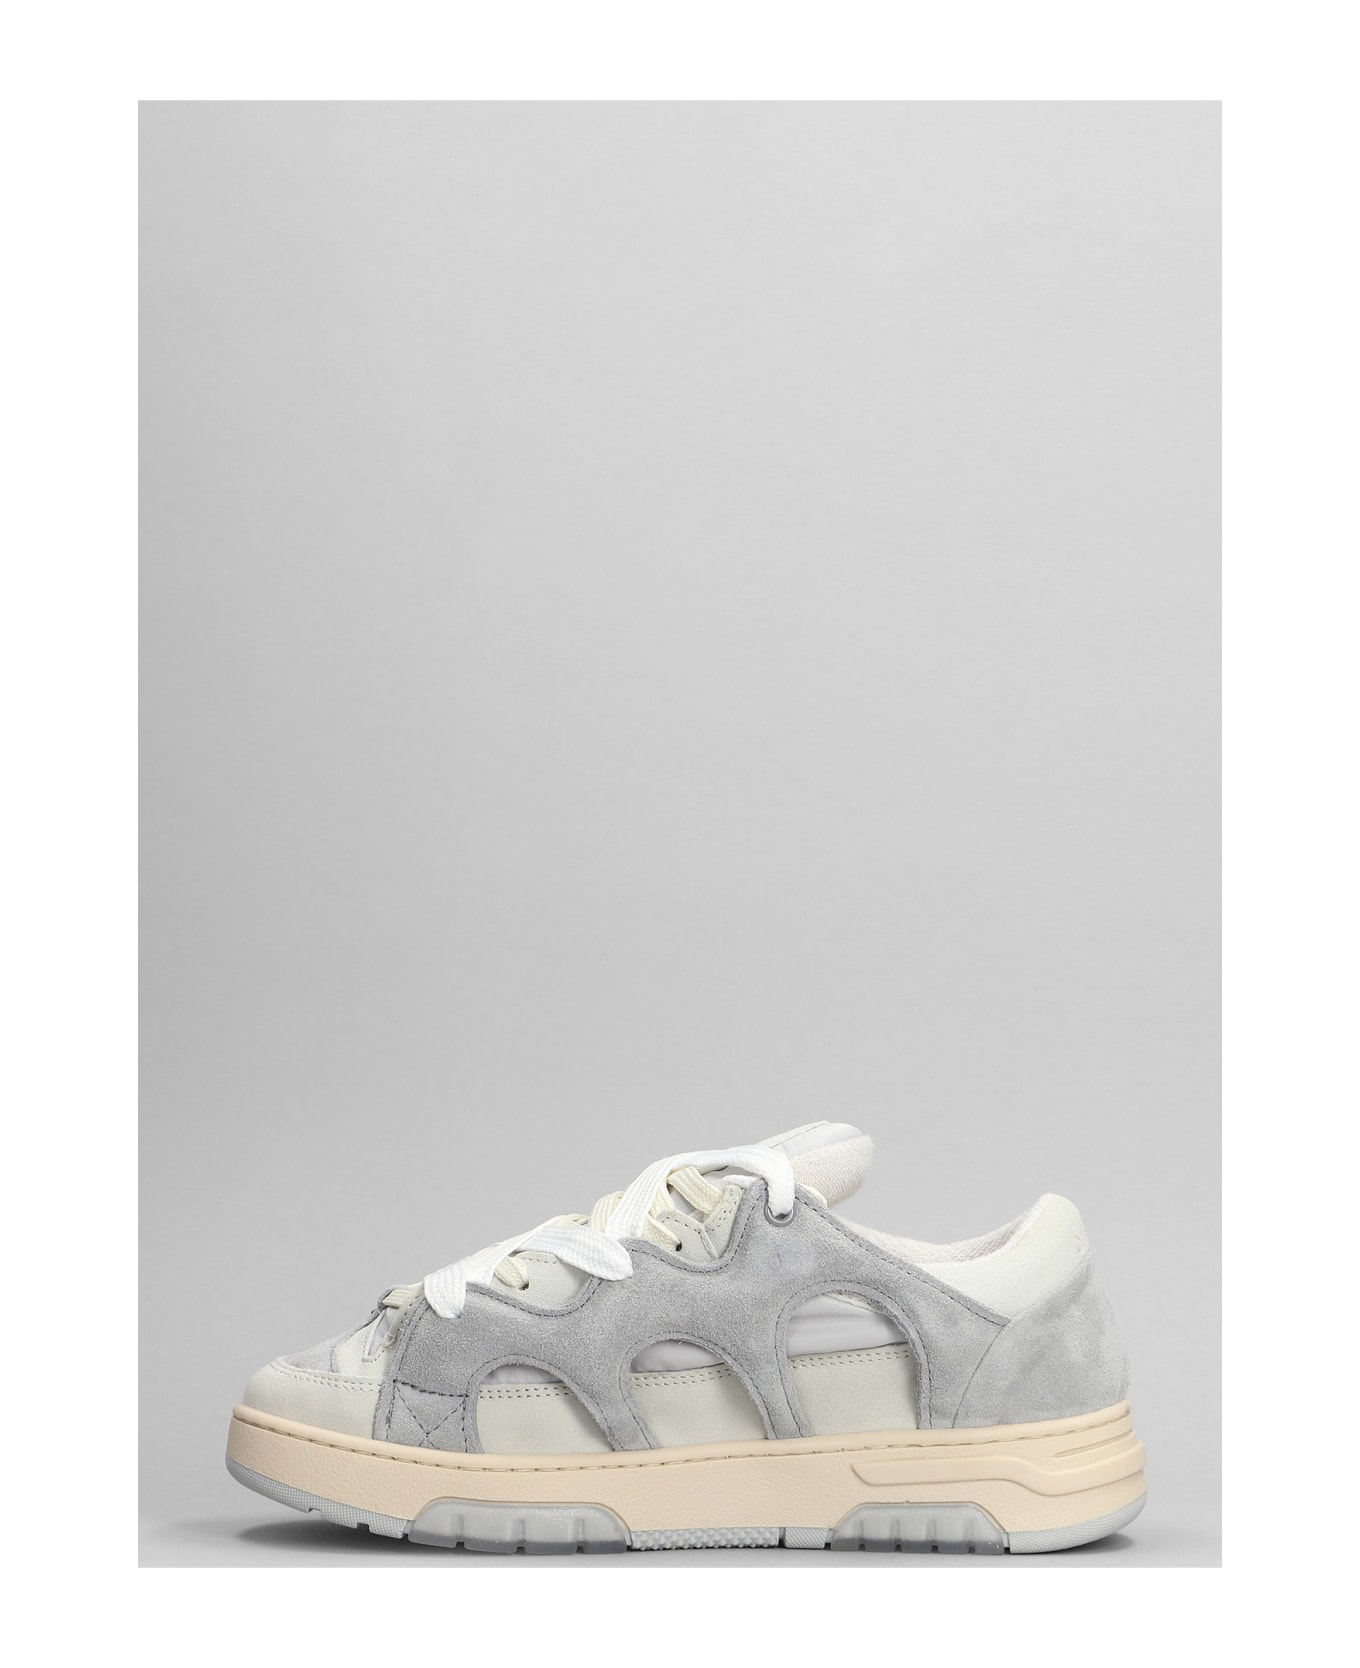 Paura Santha 1 Sneakers In Grey Suede And Fabric - grey